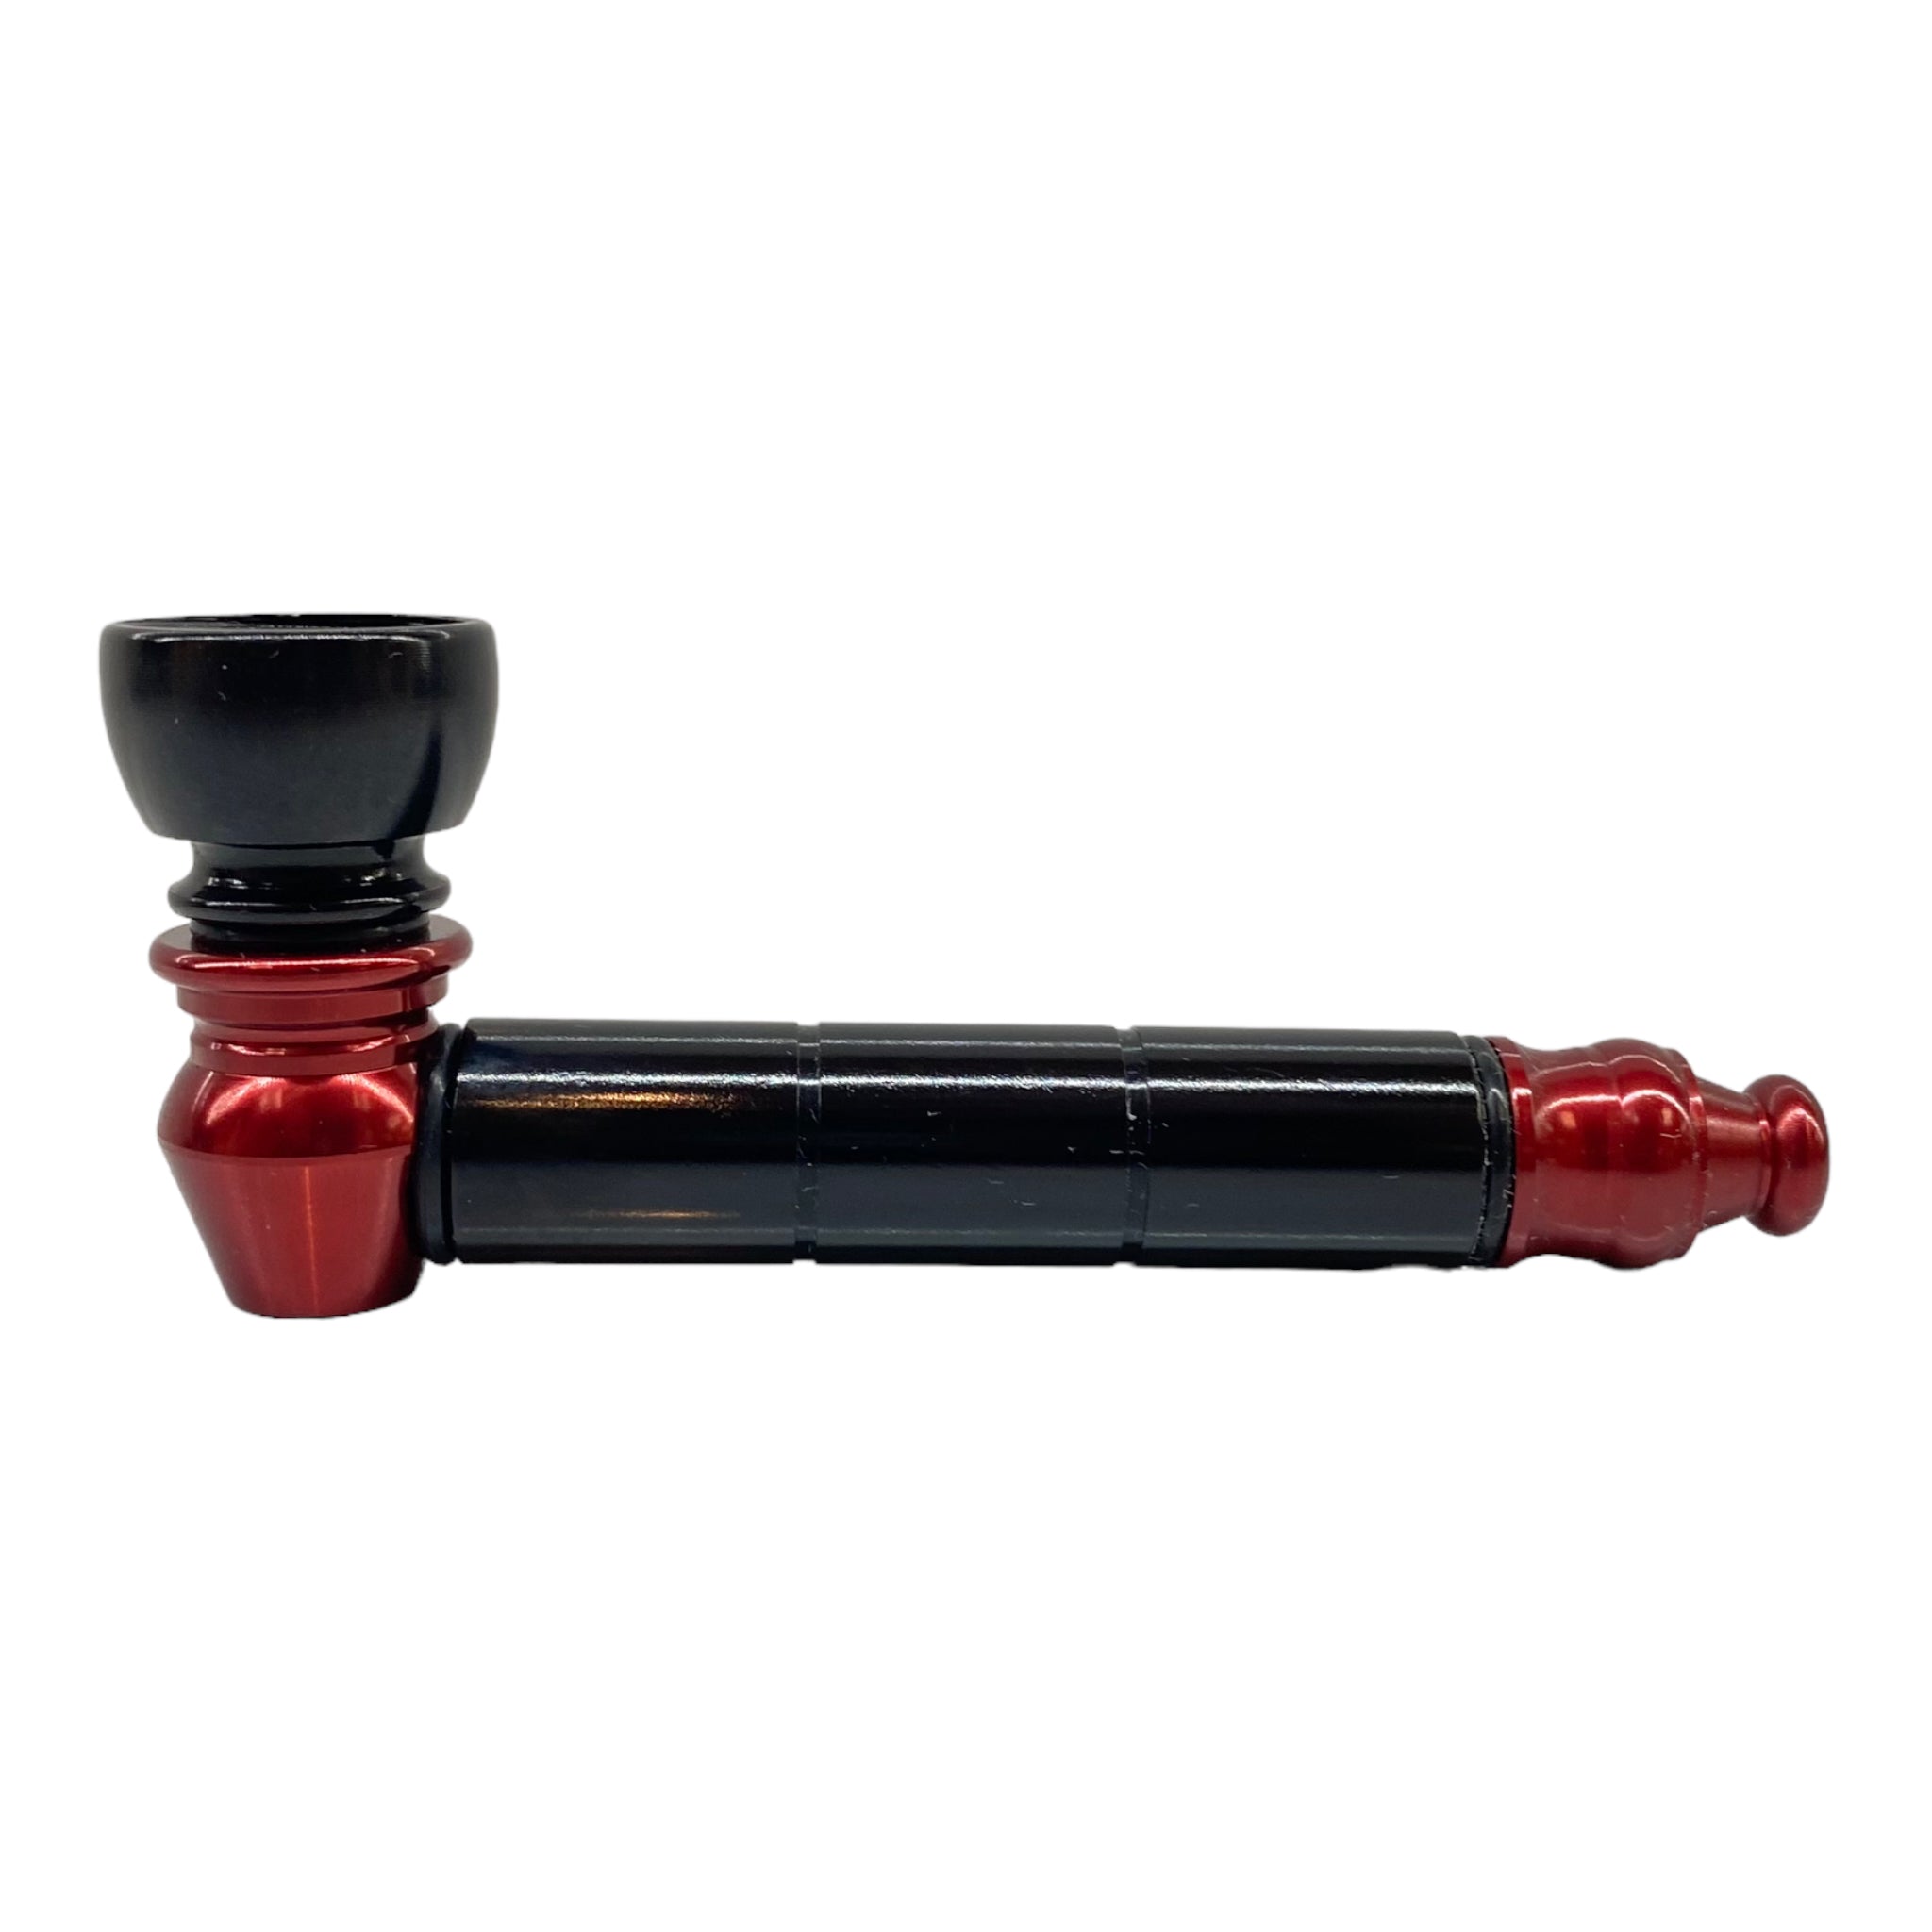 Metal weed and tobbaco pipe black and red basic metal pipe with small chamber for sale free shipping